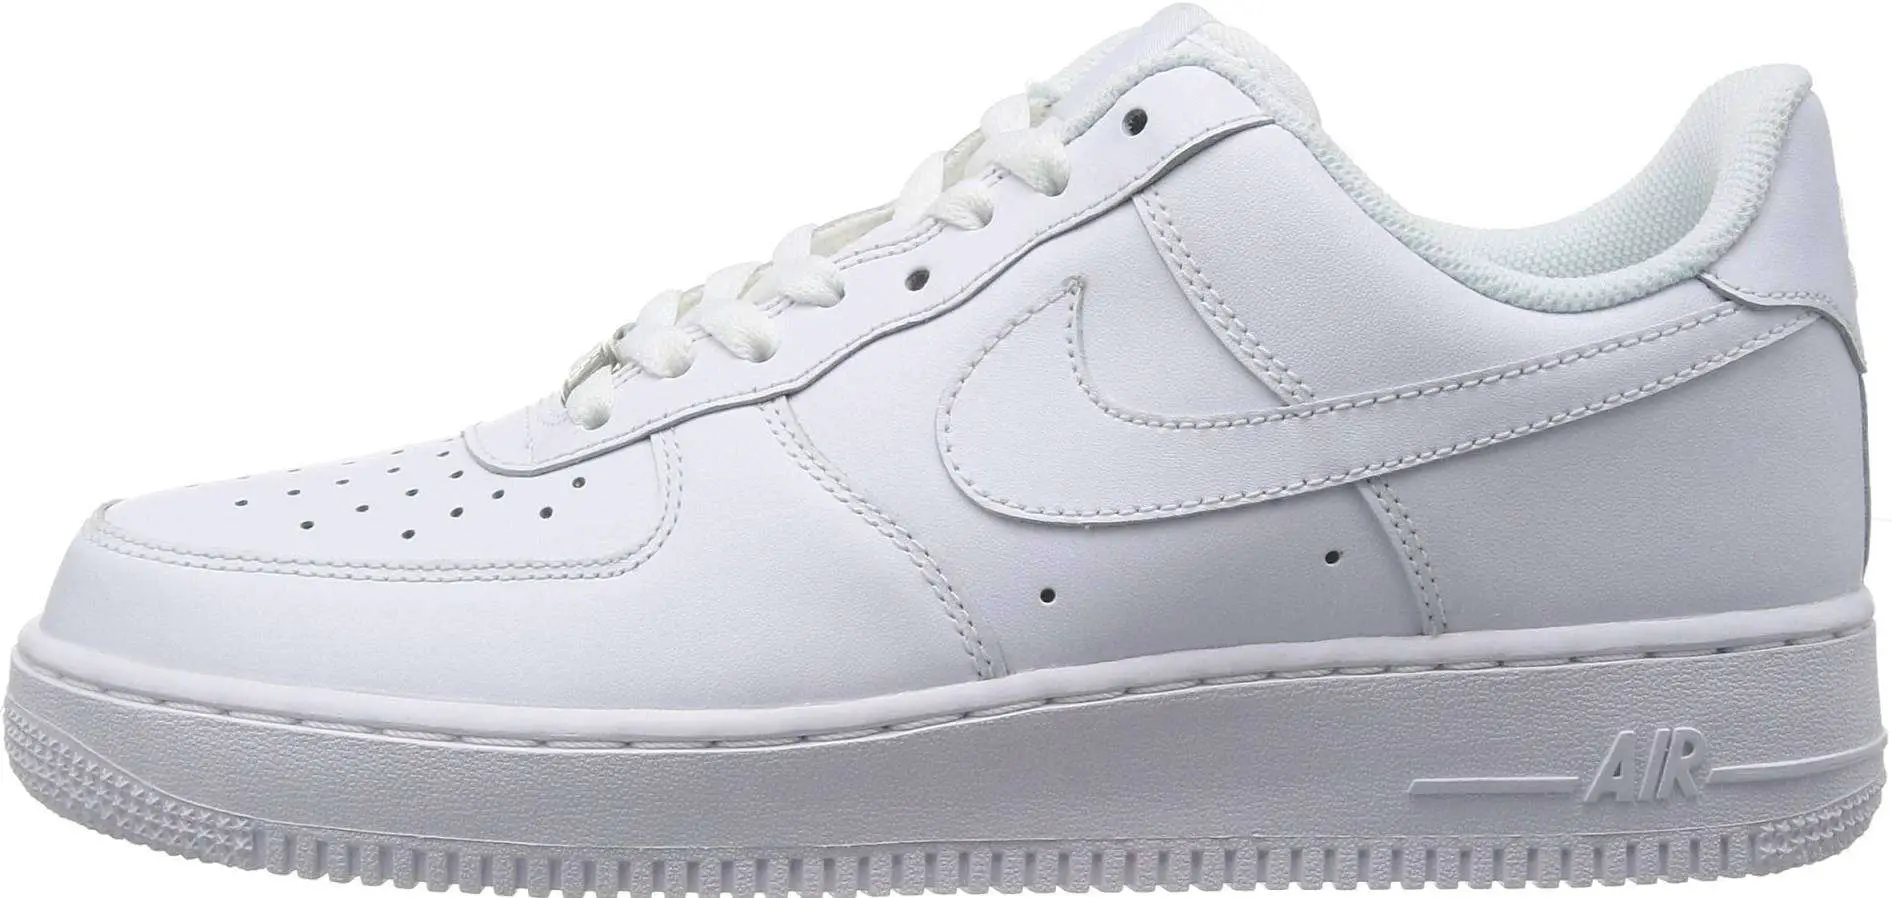 Nike Air Force 1 07 â Shoes Reviews &  Reasons To Buy